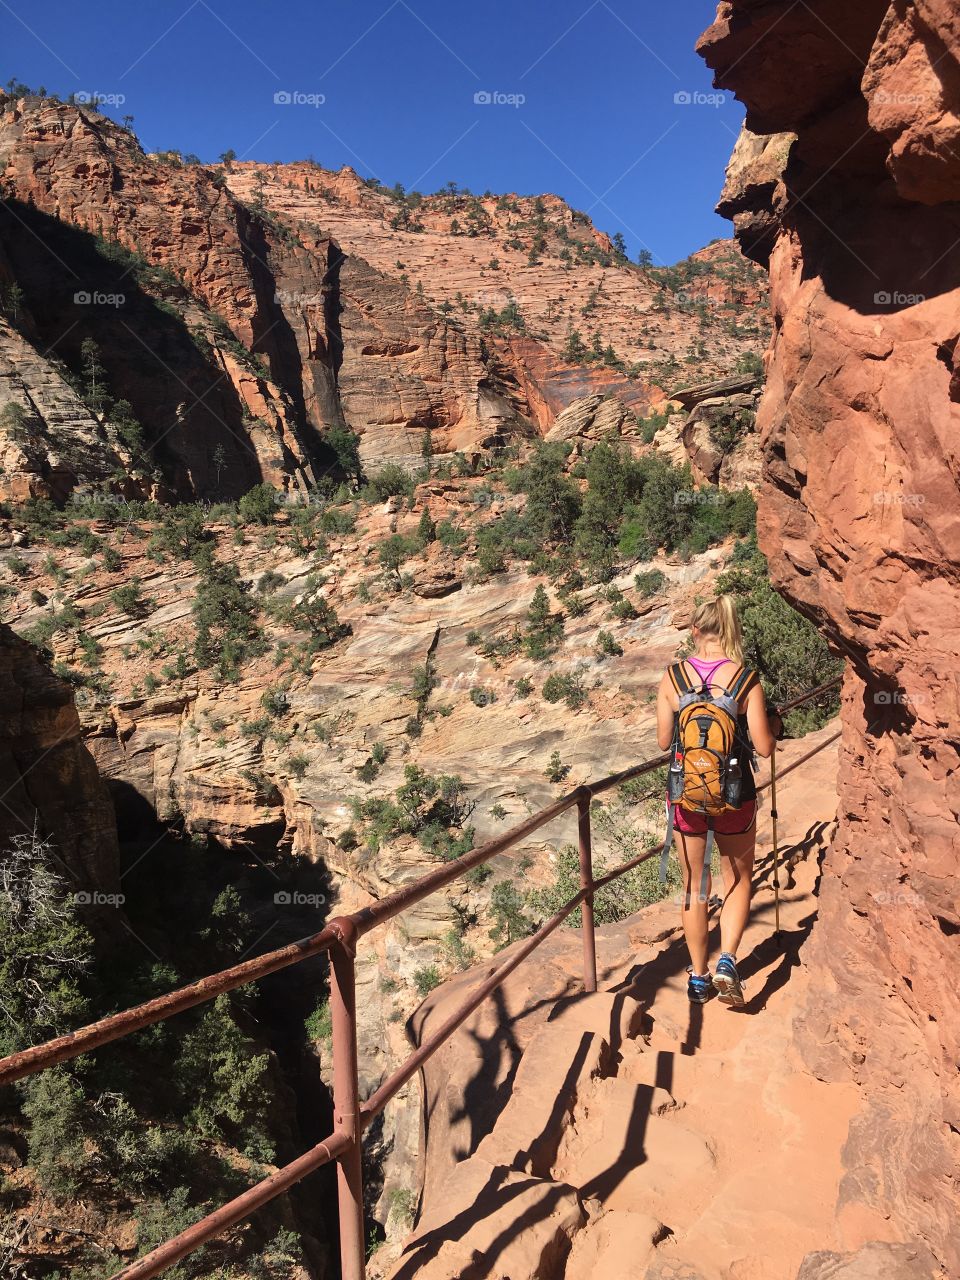 Gorgeous, thrilling hike up to Canyon Overlook in Zion National Park in Utah.